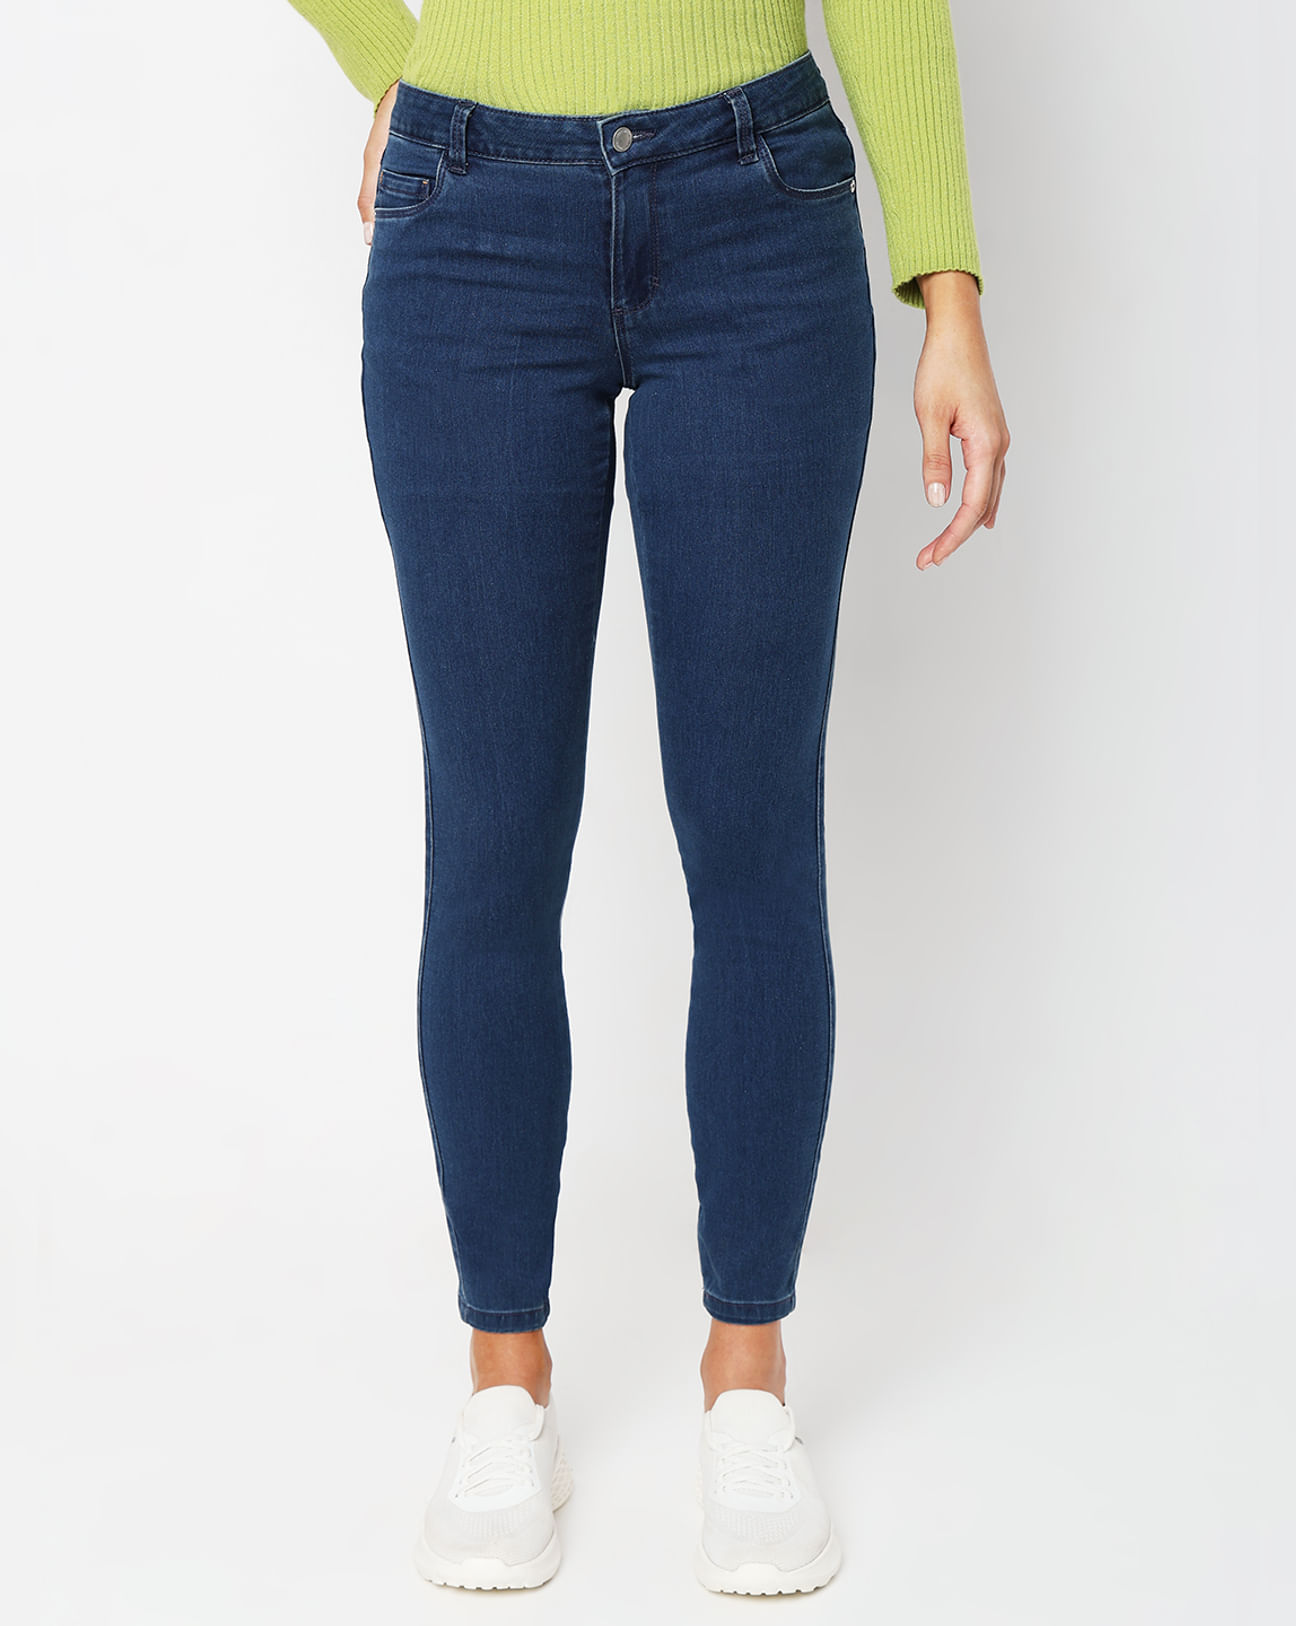 Buy Black High Waisted Skinny Jeggings With Stretch 8S, Jeans